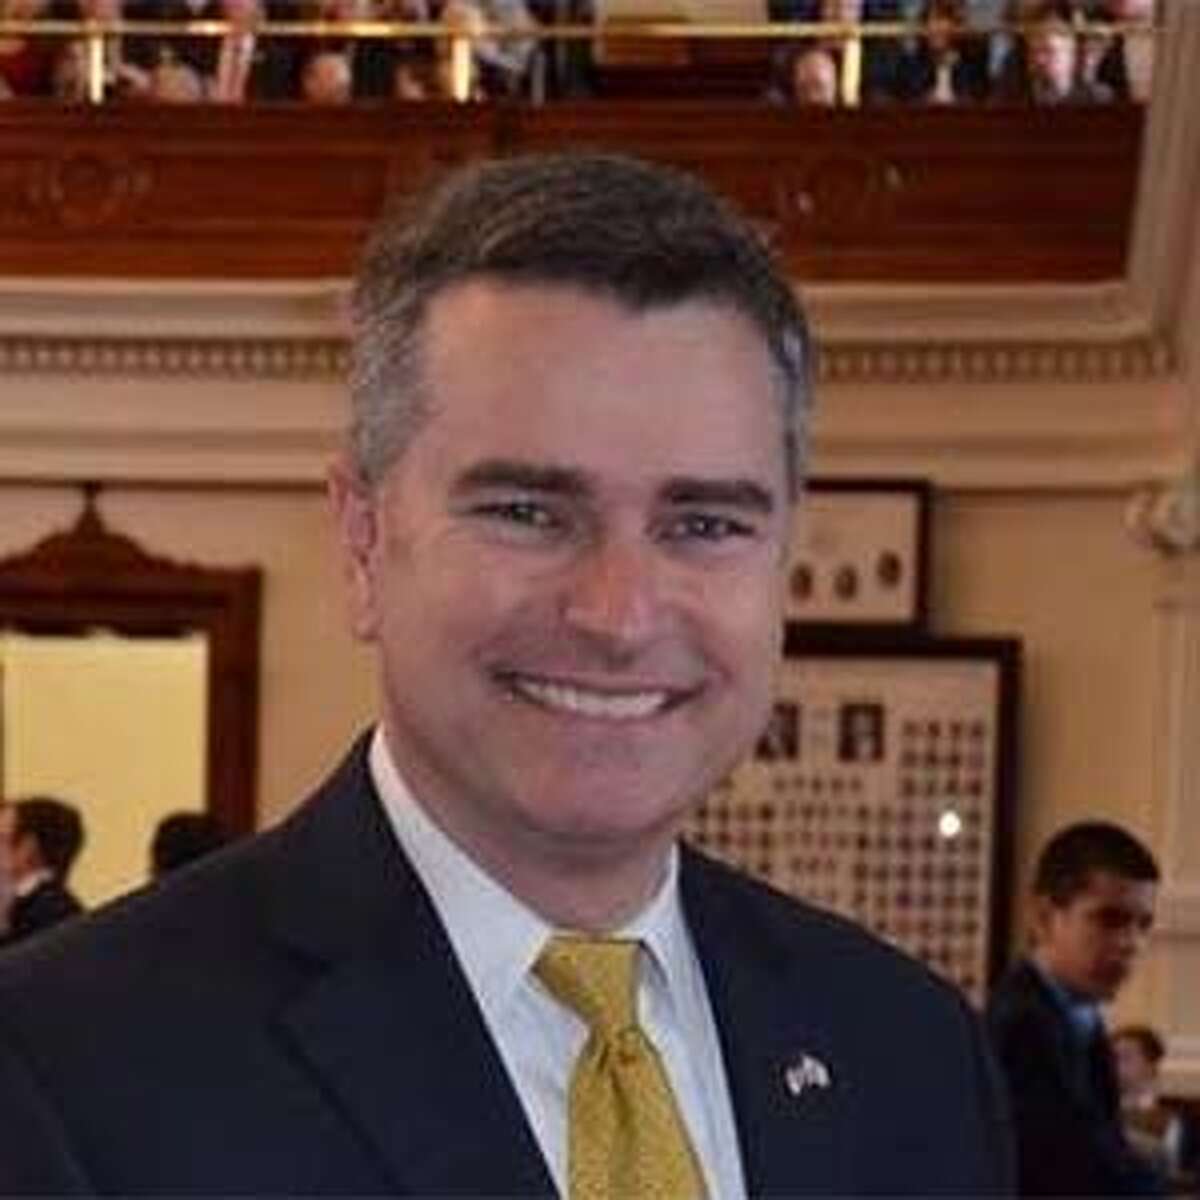 Josh Flynn is a candidate for Harris County Department of Education